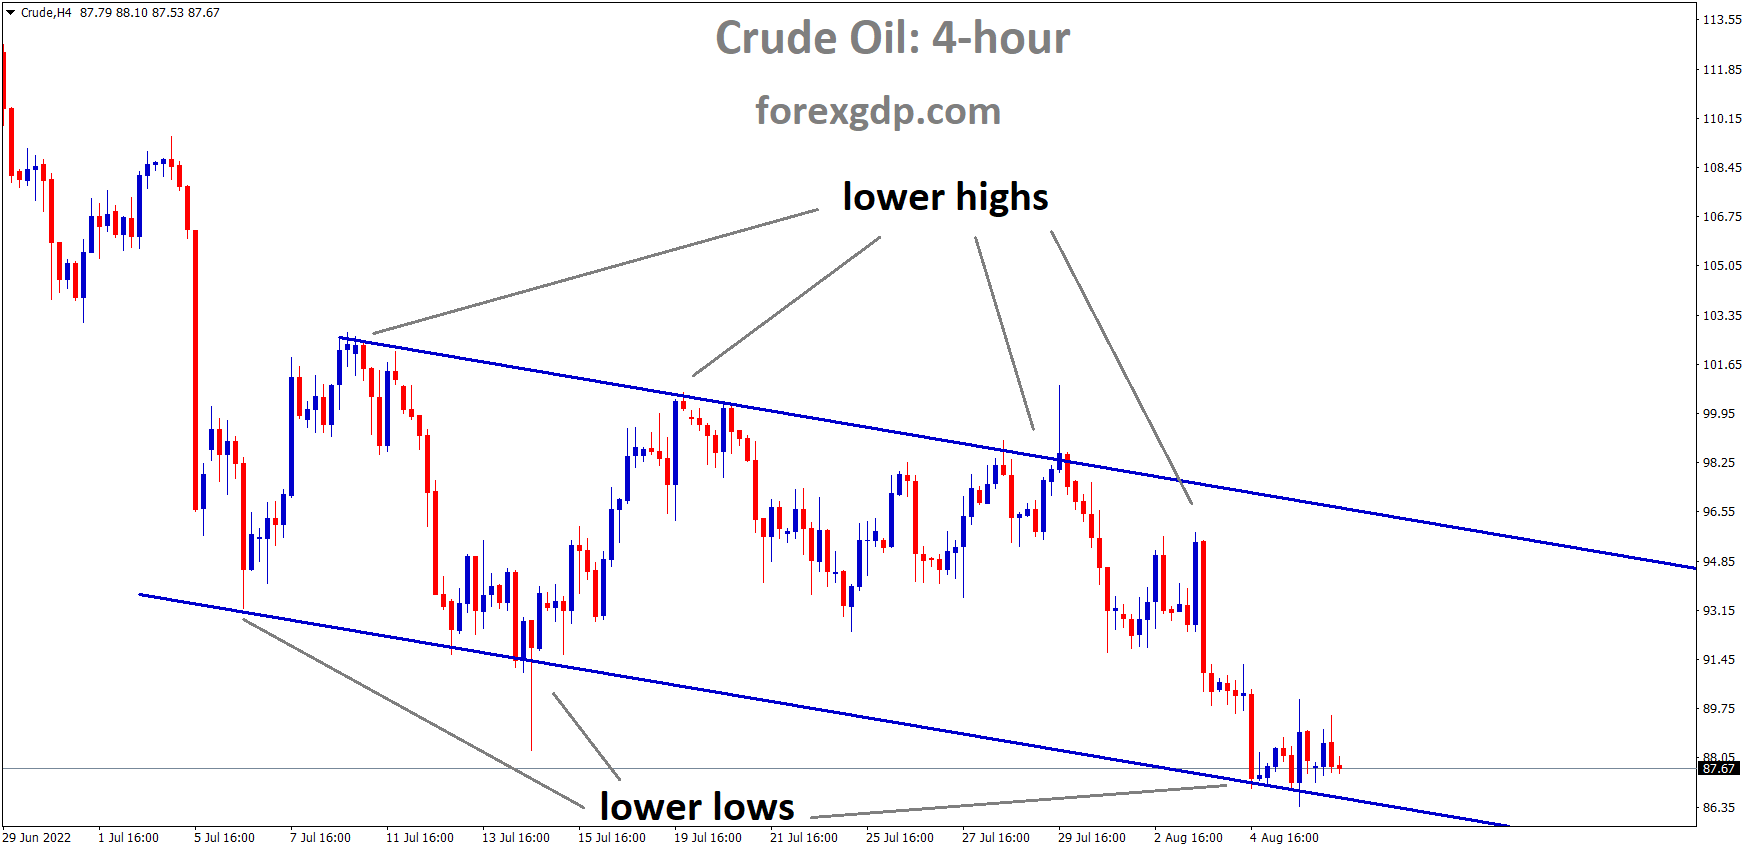 Crude Oil is moving in the Descending channel and the market has reached the Lower low area of the channel